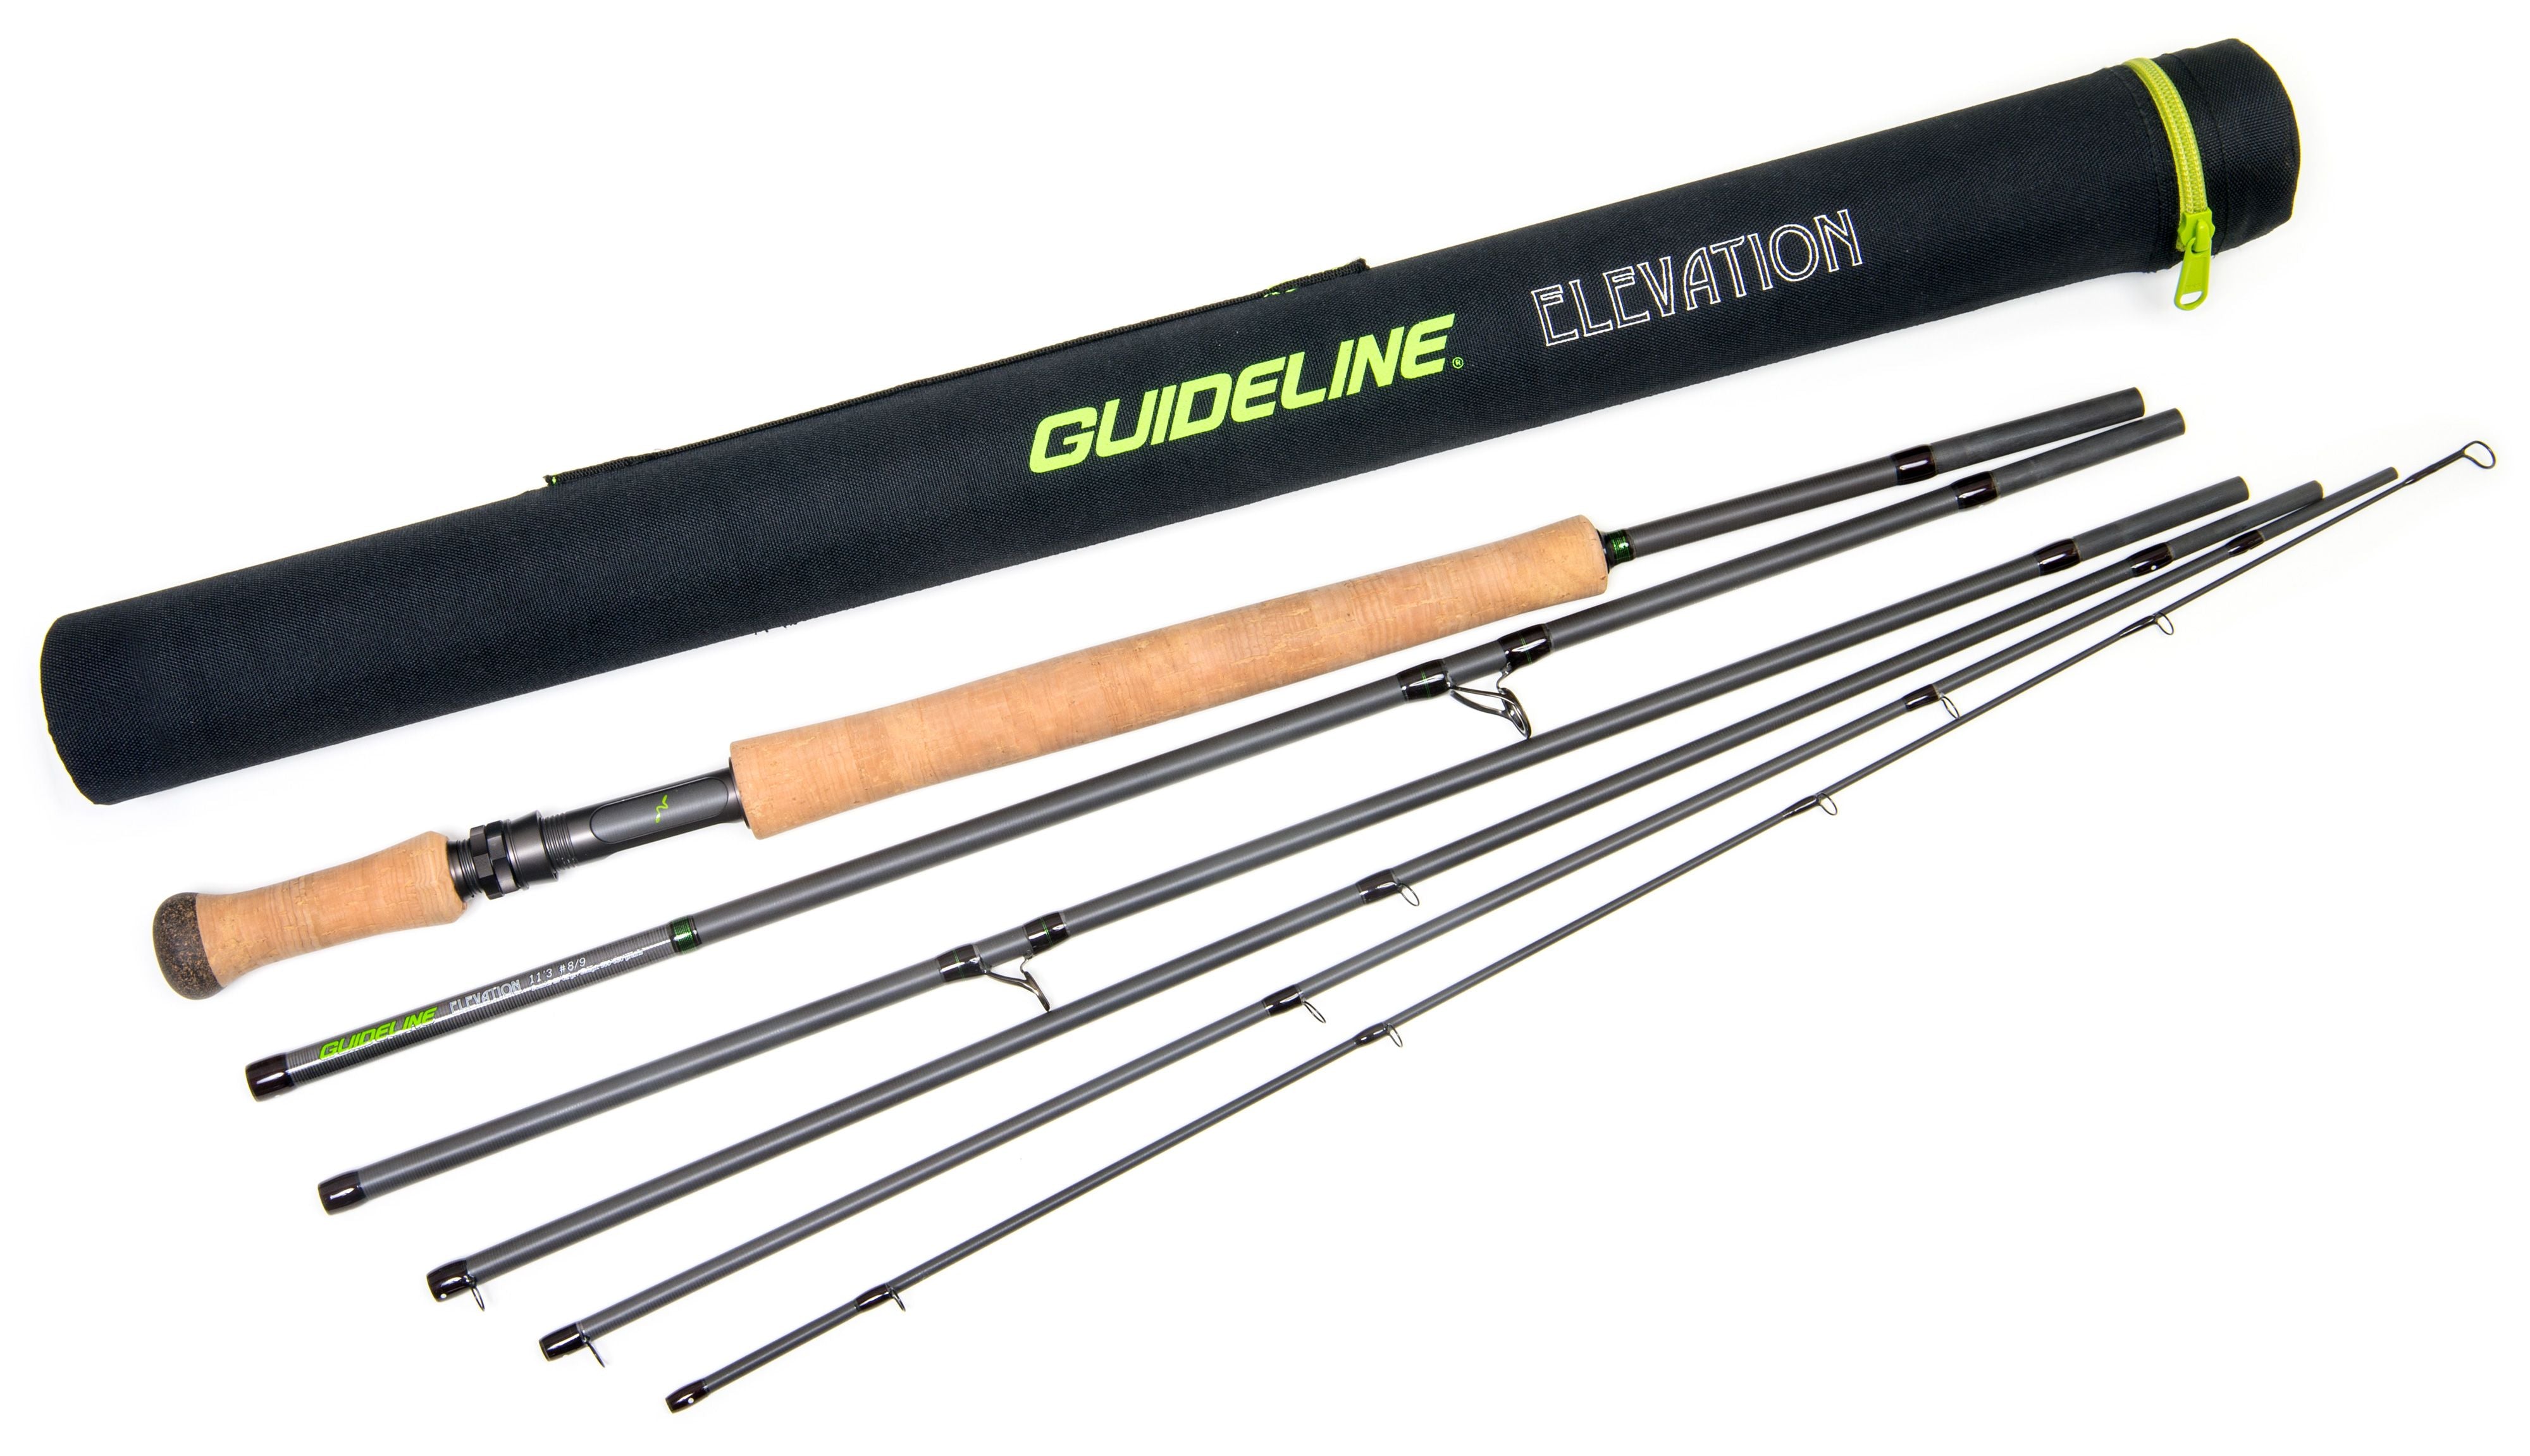 GUIDELINE ELEVATION DH 6PCE FLY RODS